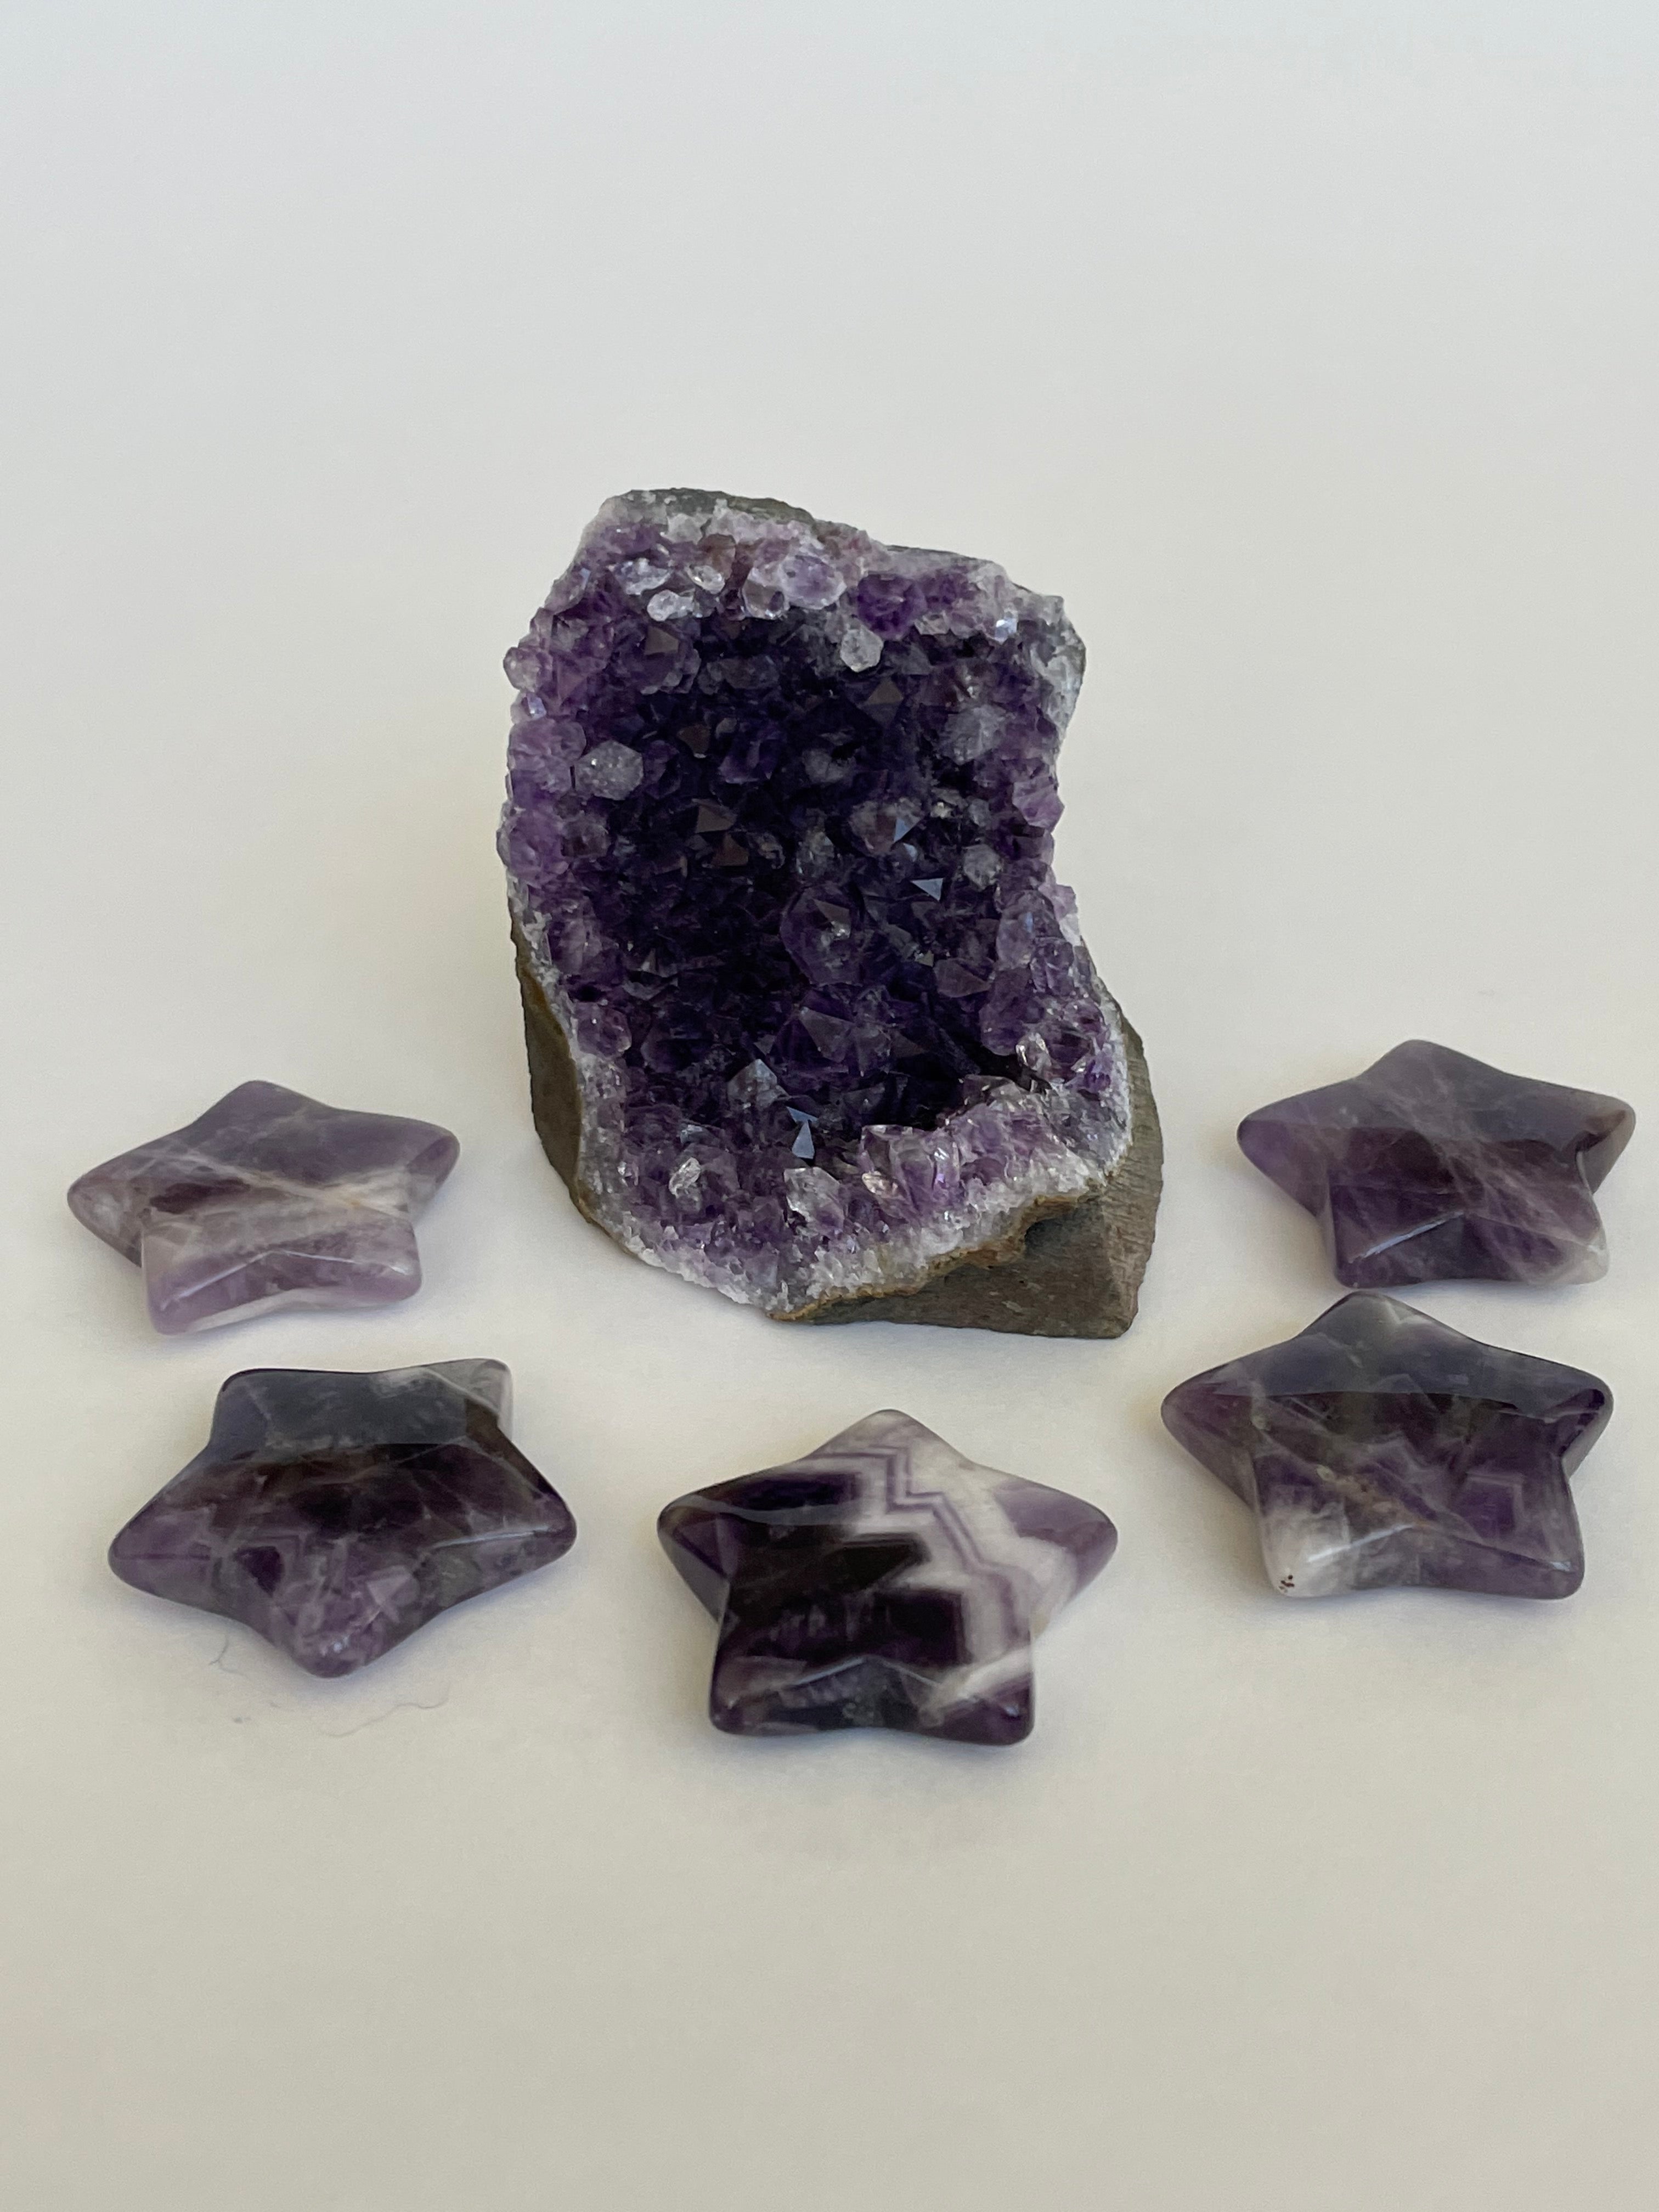 View of several amethyst stars. Love the banding on this particular chevron amethyst star. It can be used for meditation, healing, for your altar or as décor for any room in your home or office. Easy to slip right into your pocket so you have the energy of amethyst everywhere you go. Approximately 1¼". Cost is $6 for one star.